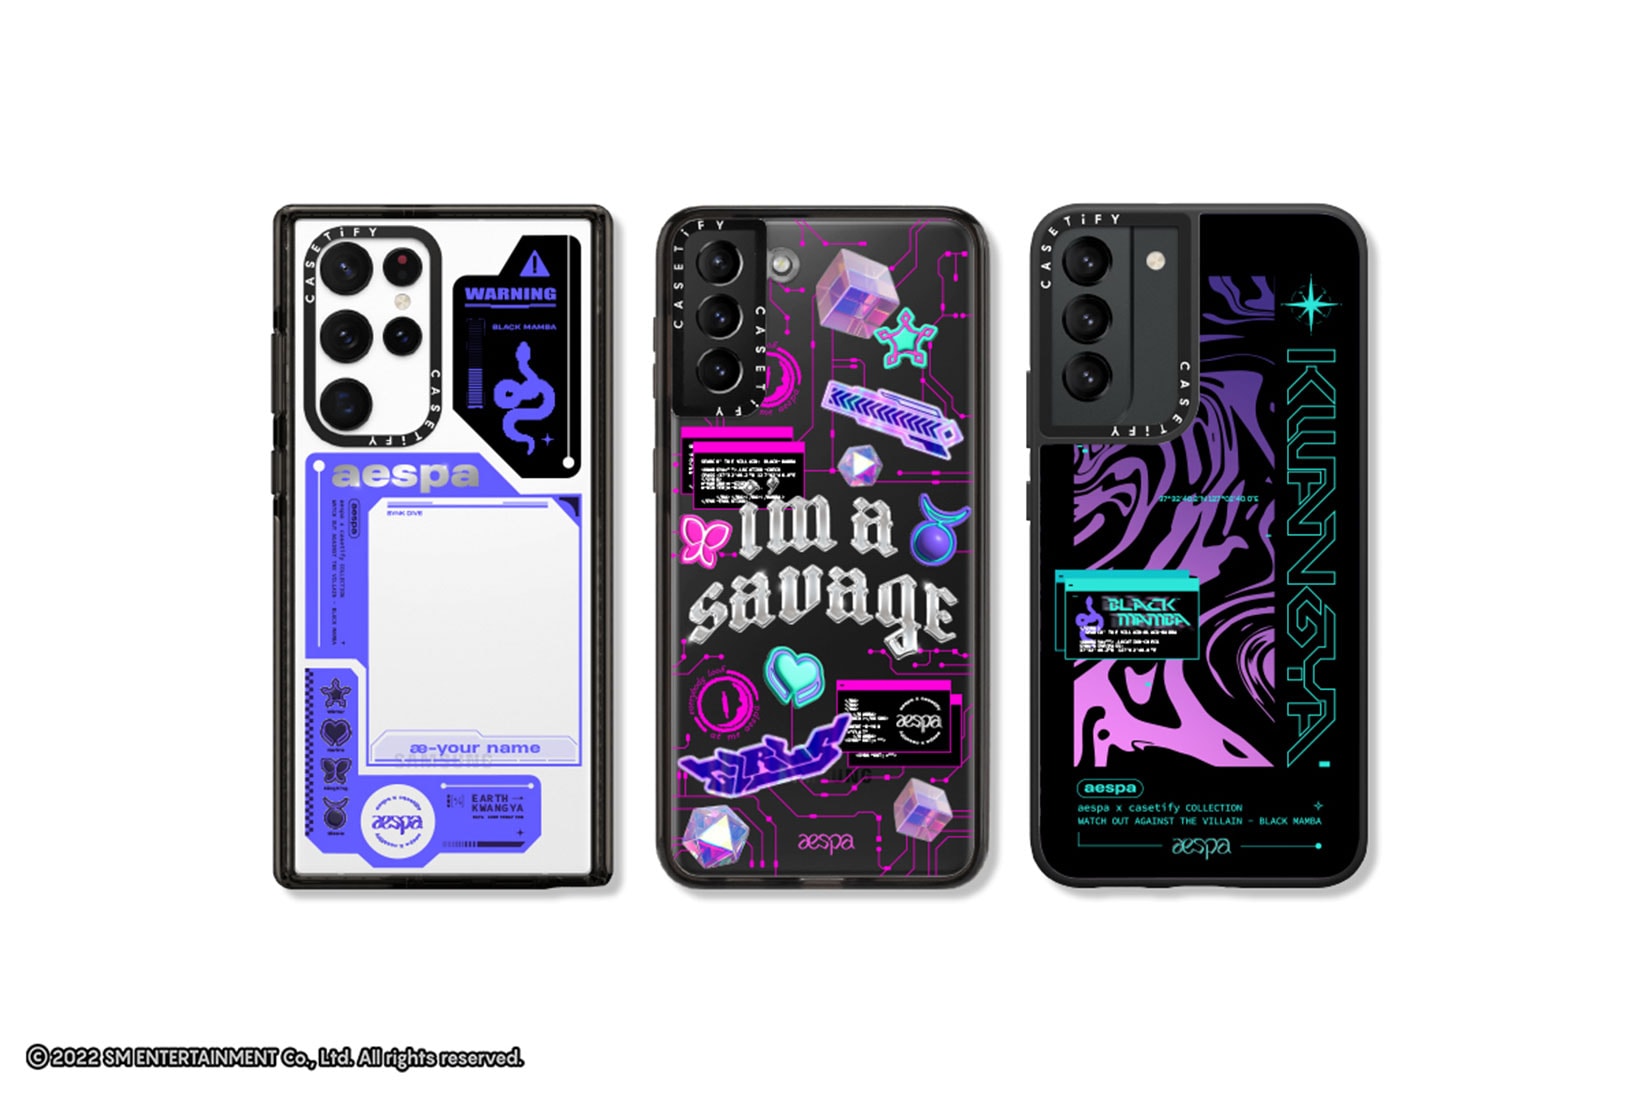 aespa Casetify K-pop Group Phone Cases AirPods Covers Tech Accessories Collaboration Release